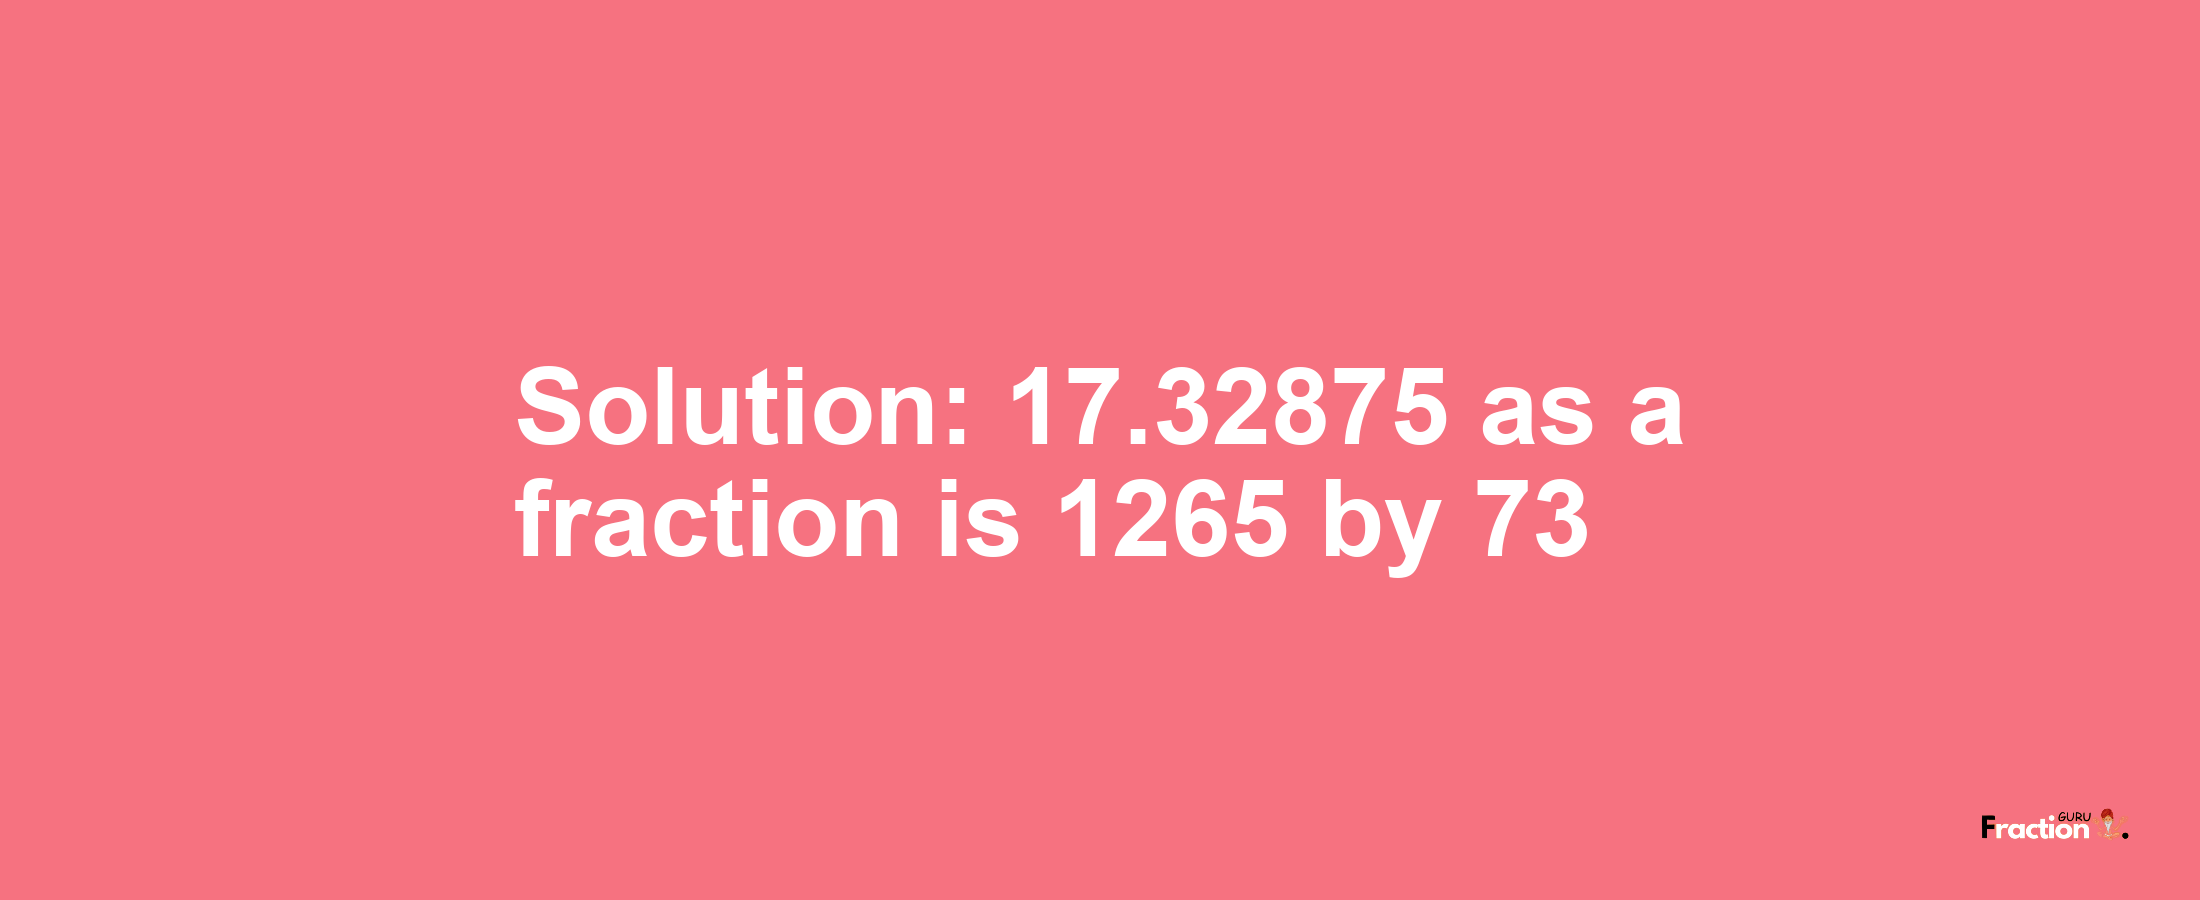 Solution:17.32875 as a fraction is 1265/73